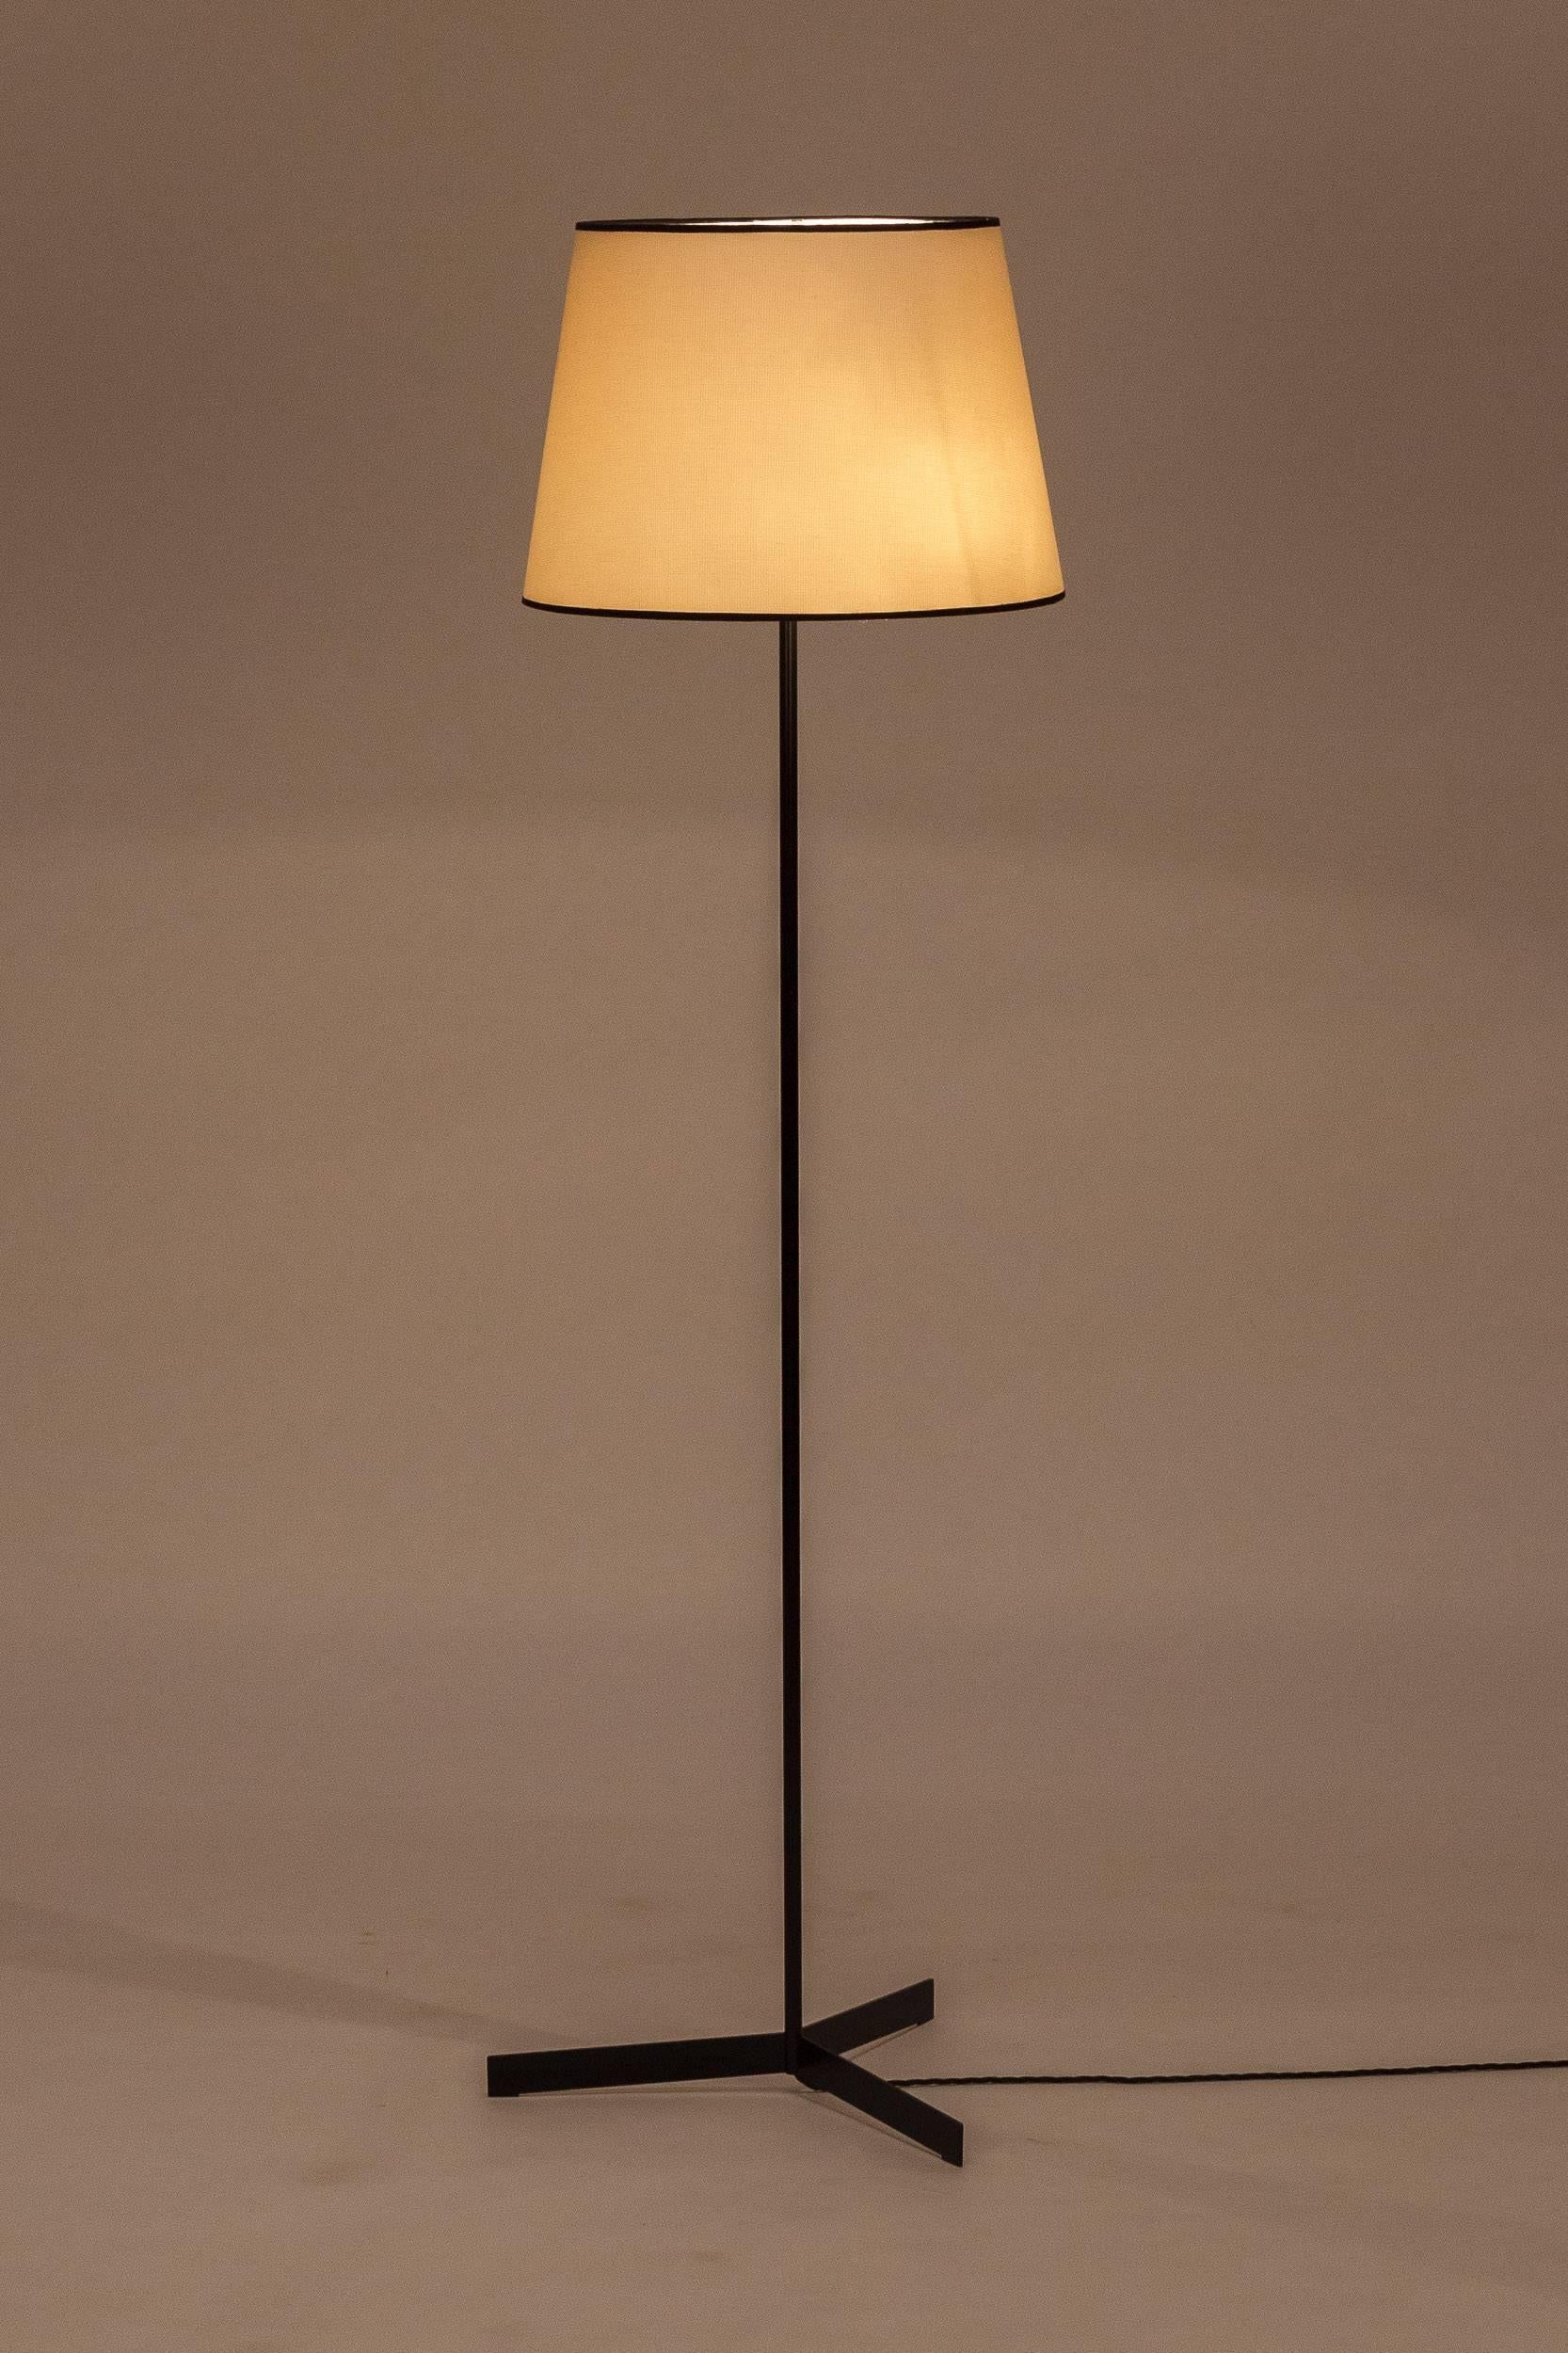 Tripodal floor lamp manufactured in the 1960s in France. Original stem made of lacquered tubular steel, new shade made of cotton fabric on original frame, very decorative black ribbon on the border. Separate switch for uplight and downlight, newly